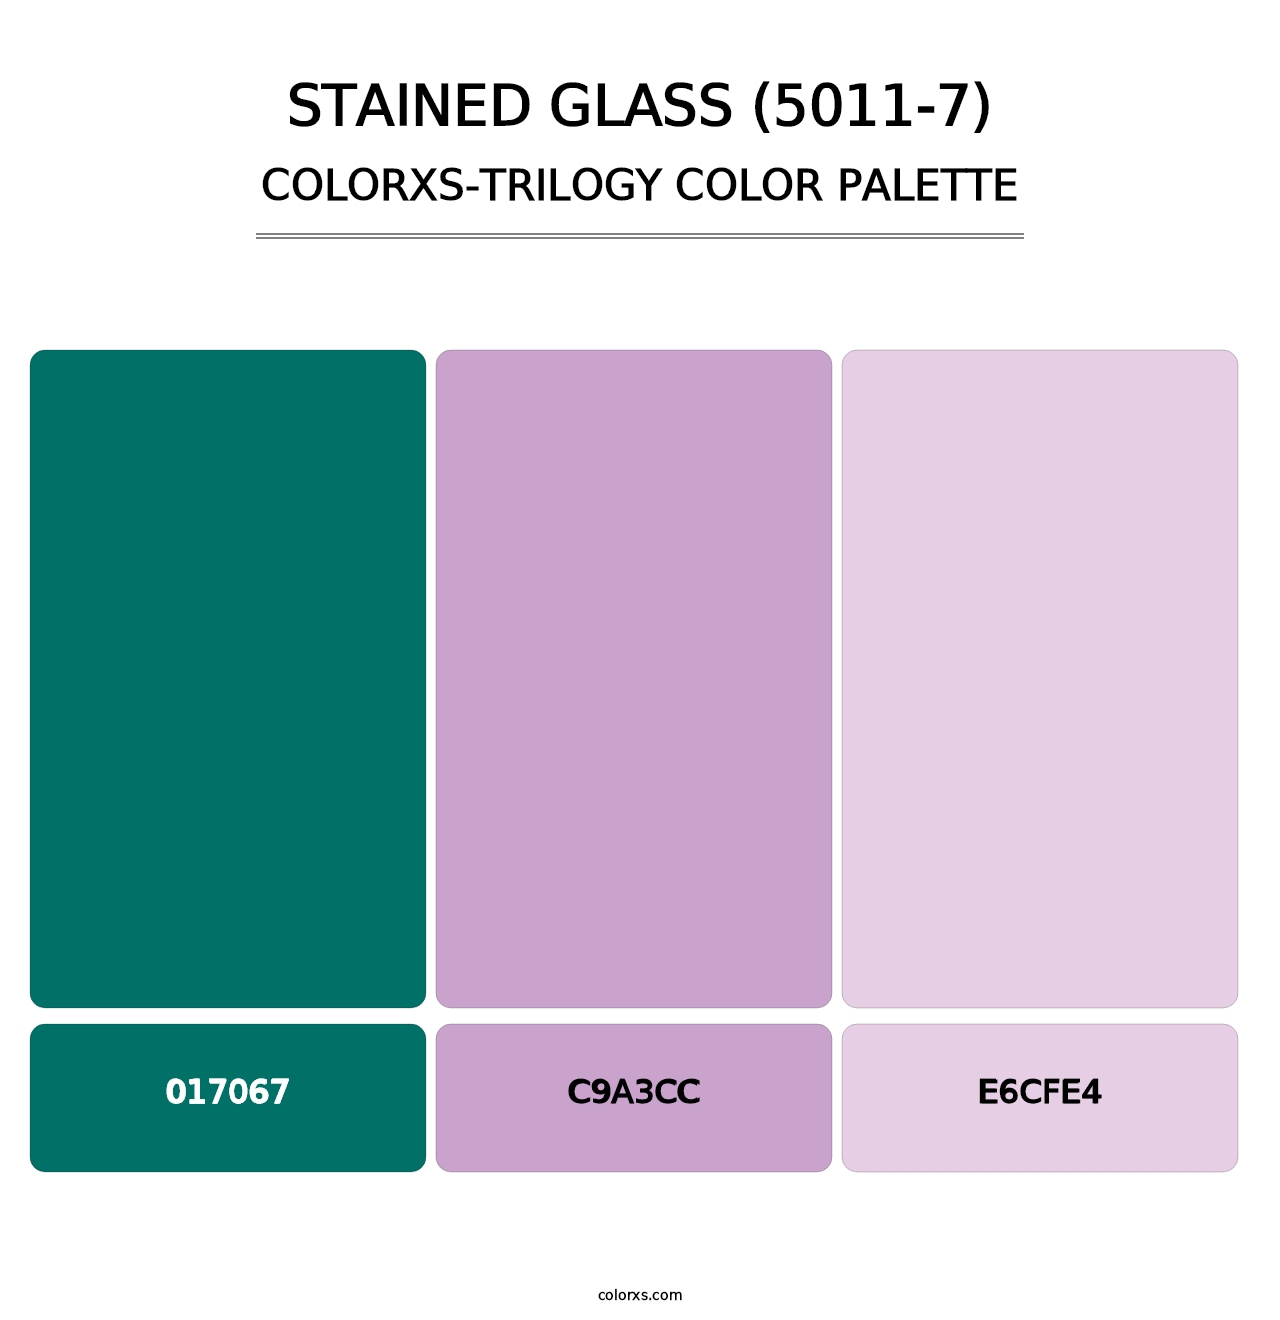 Stained Glass (5011-7) - Colorxs Trilogy Palette